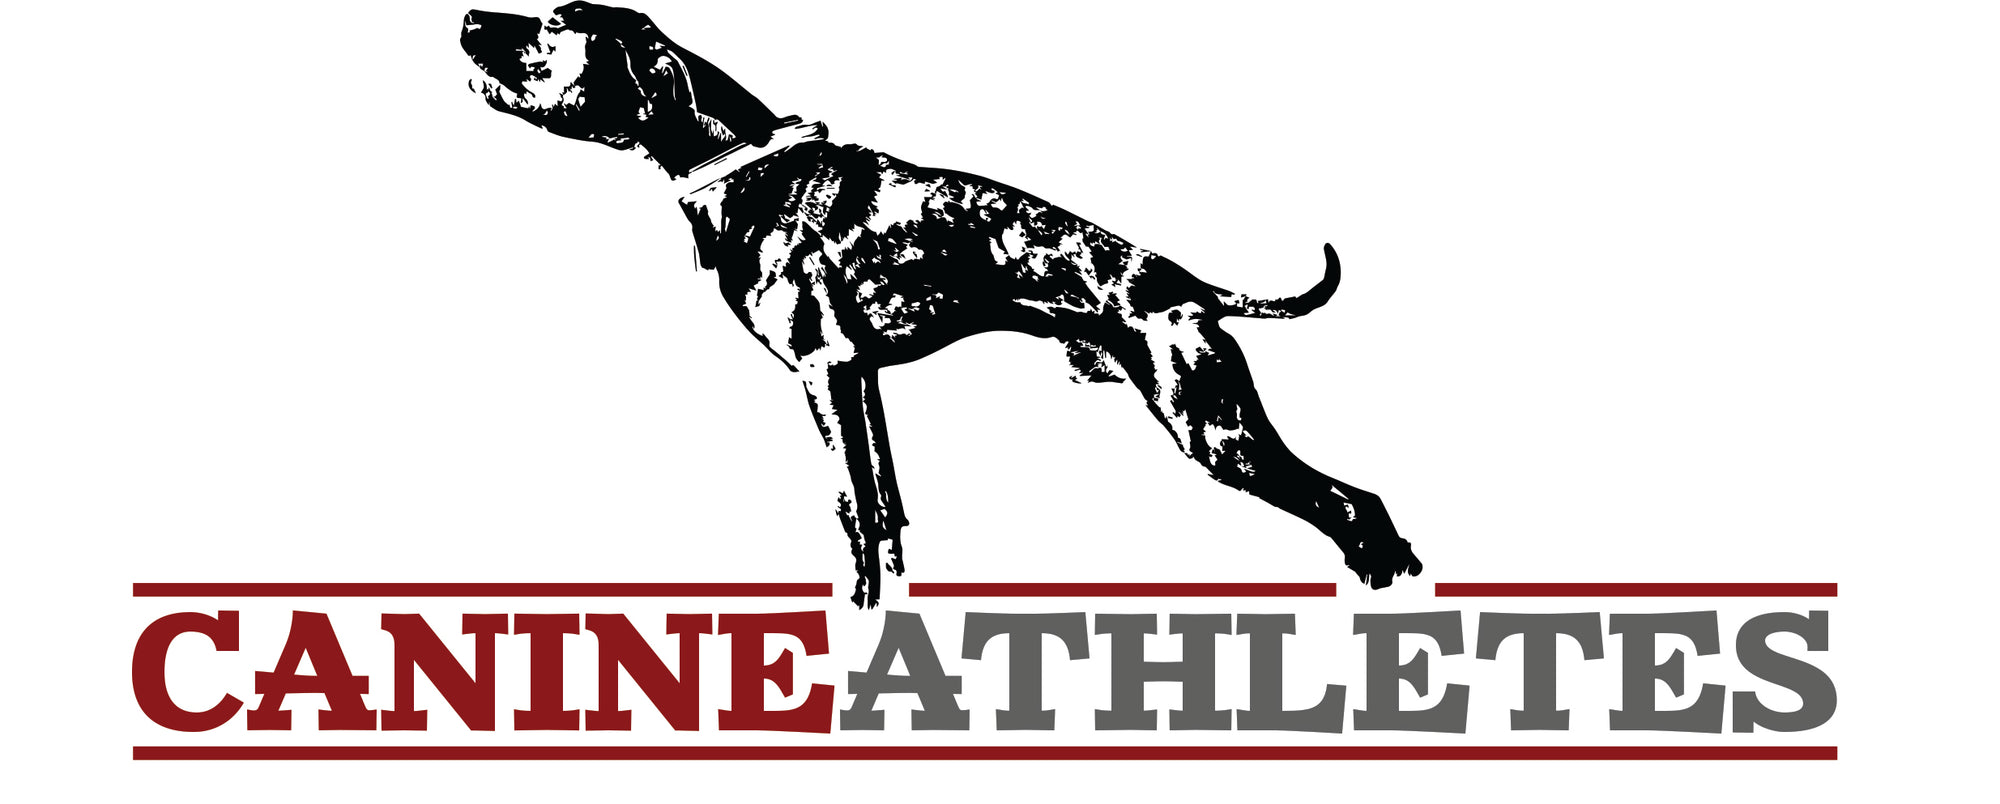 Canine Athletes Vinyl Decal - Matte Laminated (4" H x 8" L) Accessories canine-athletes